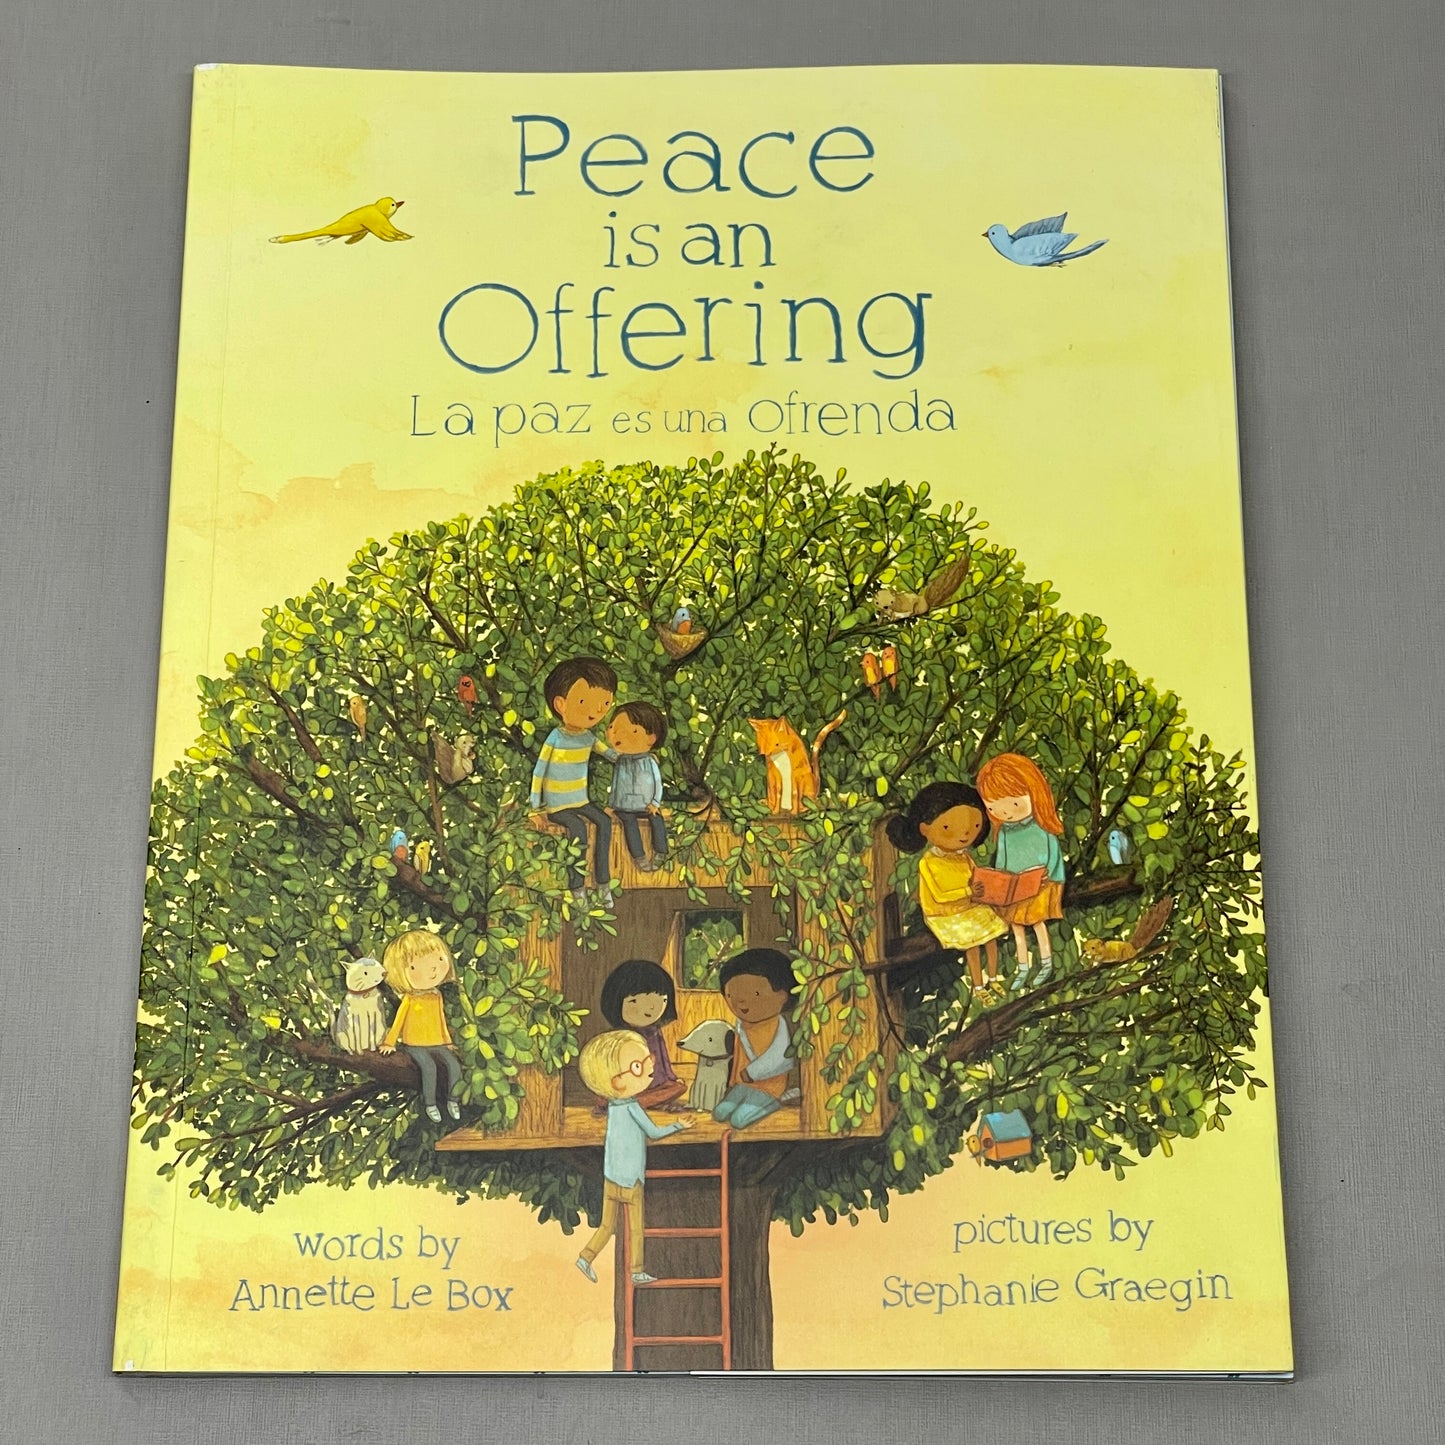 DIAL Penguin Random House 3-Book Set: Peace Is An Offering, Blue Sky White Stars, Coat Of Many Colors (New)